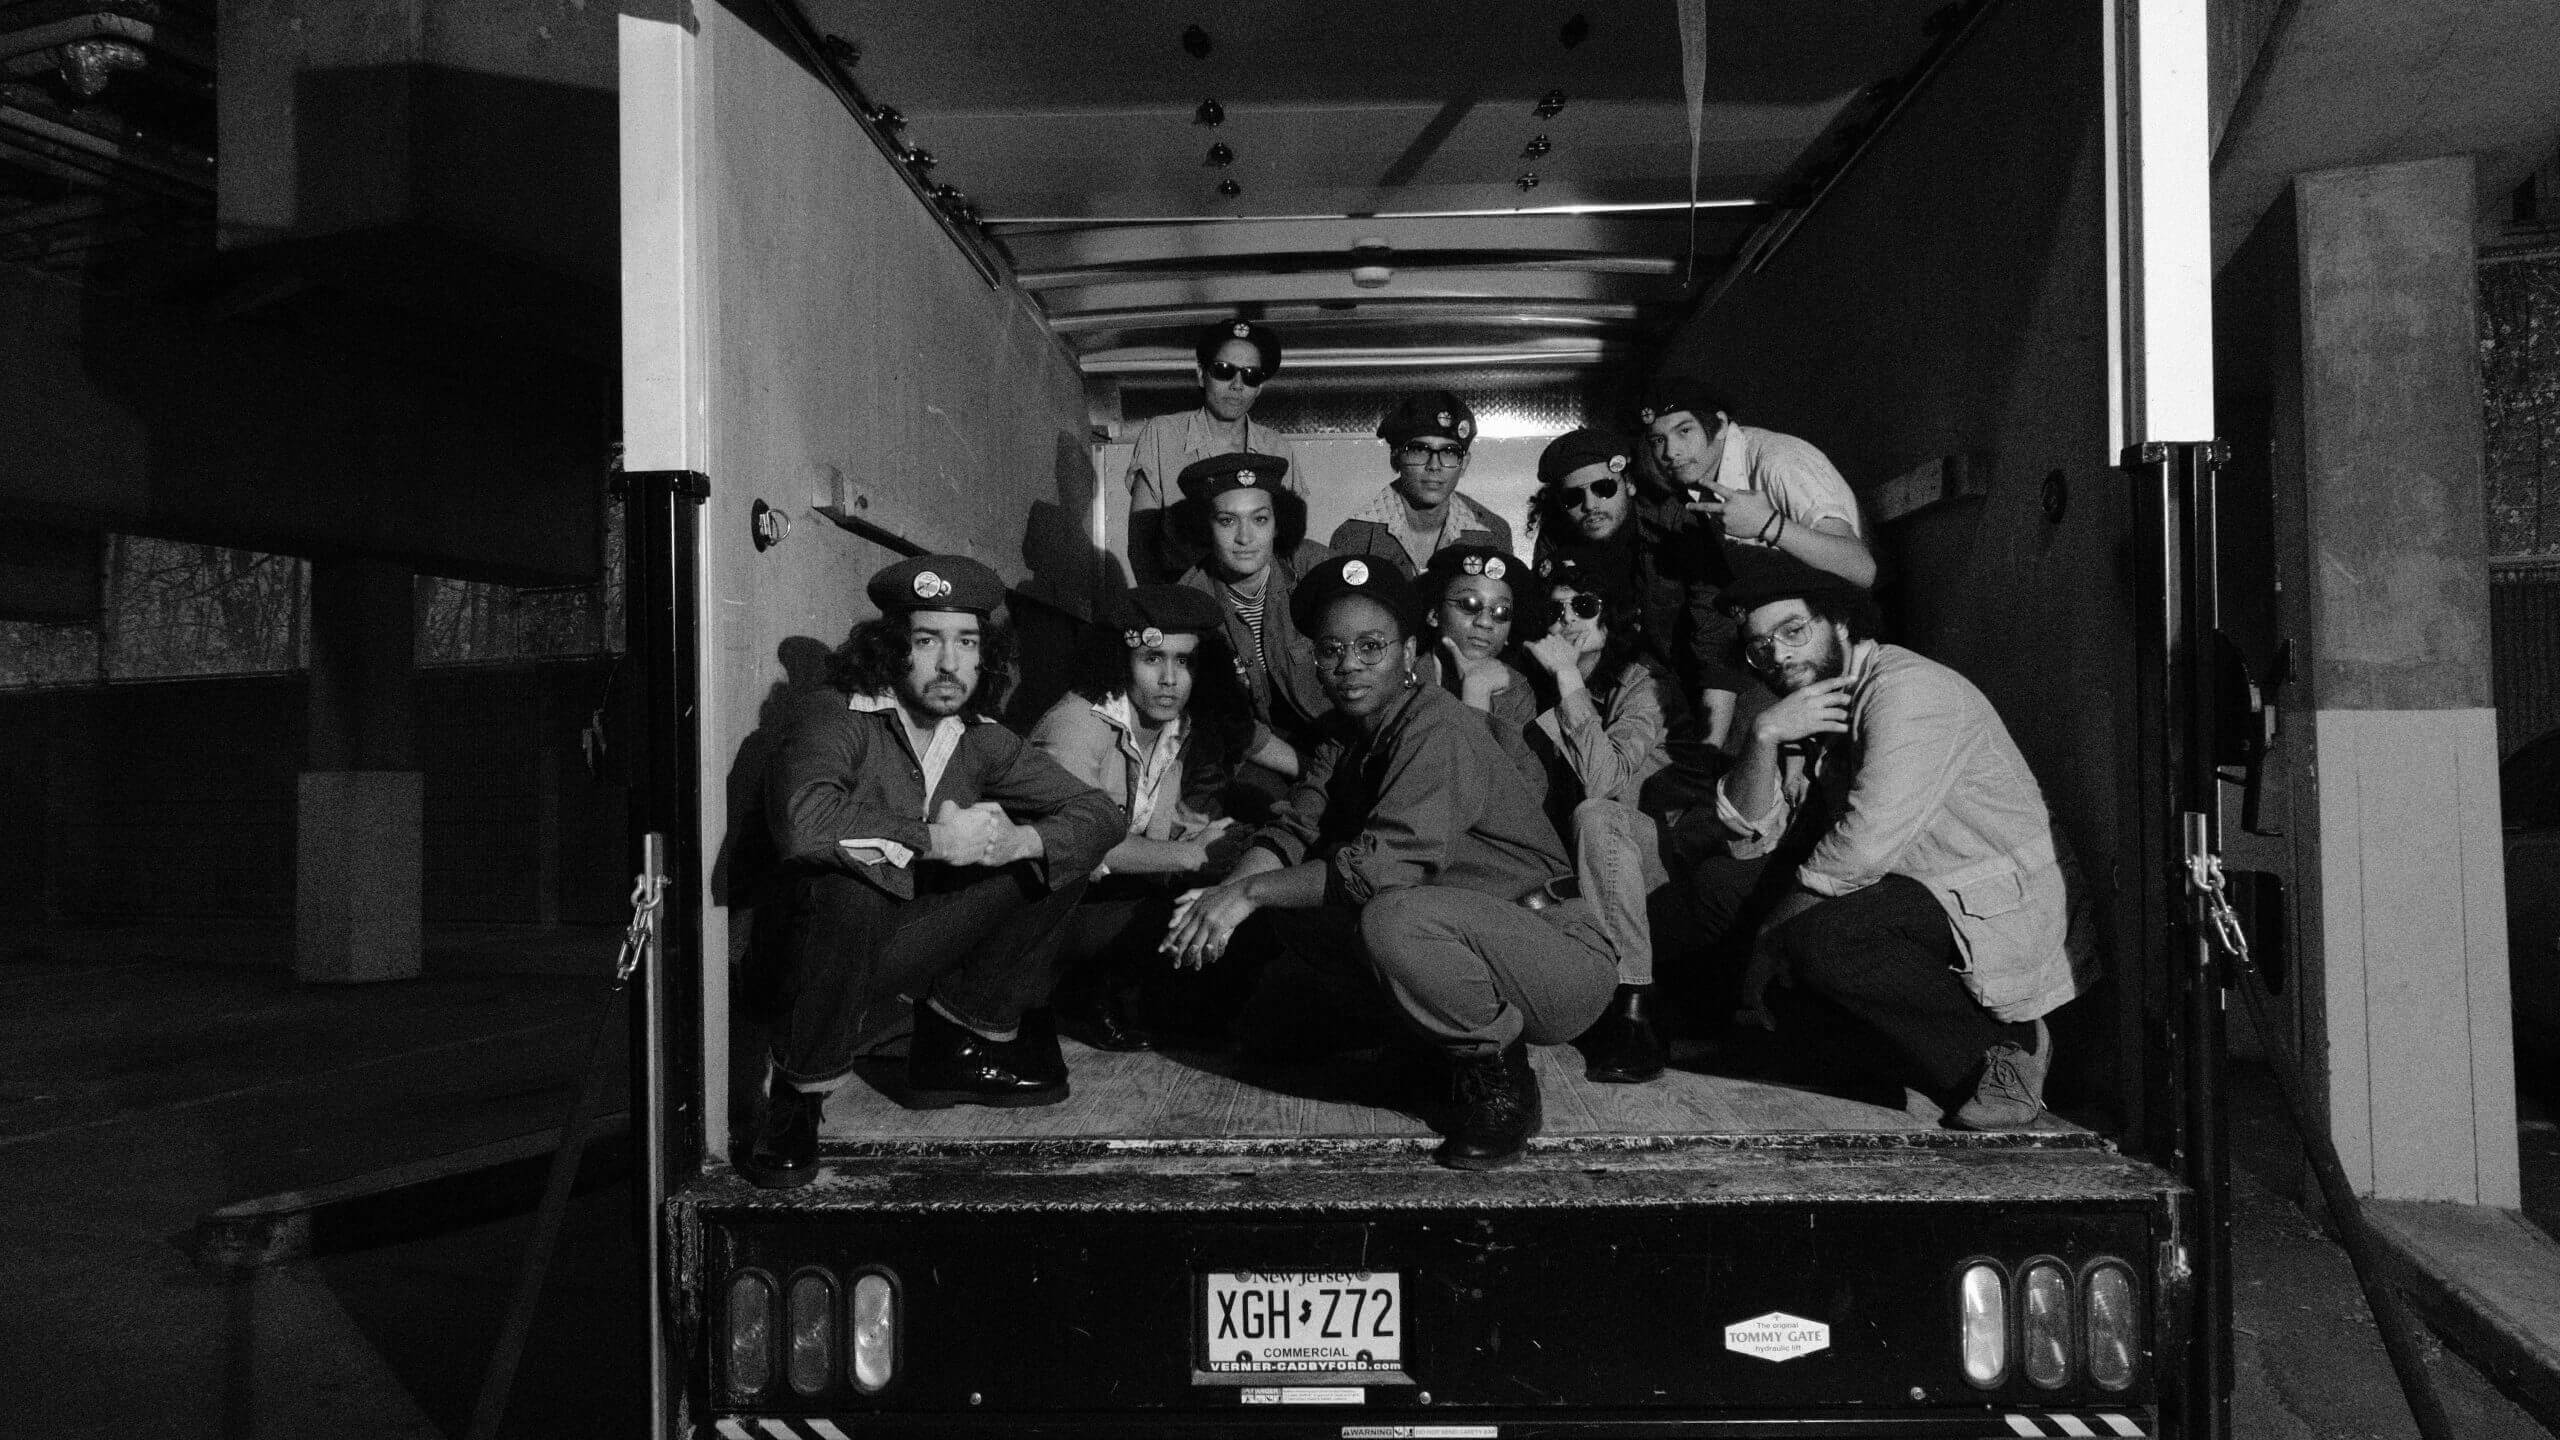 A group of actors dressed as members of the Young Lords Party inside of the back of a trailer truck, looking at the camera